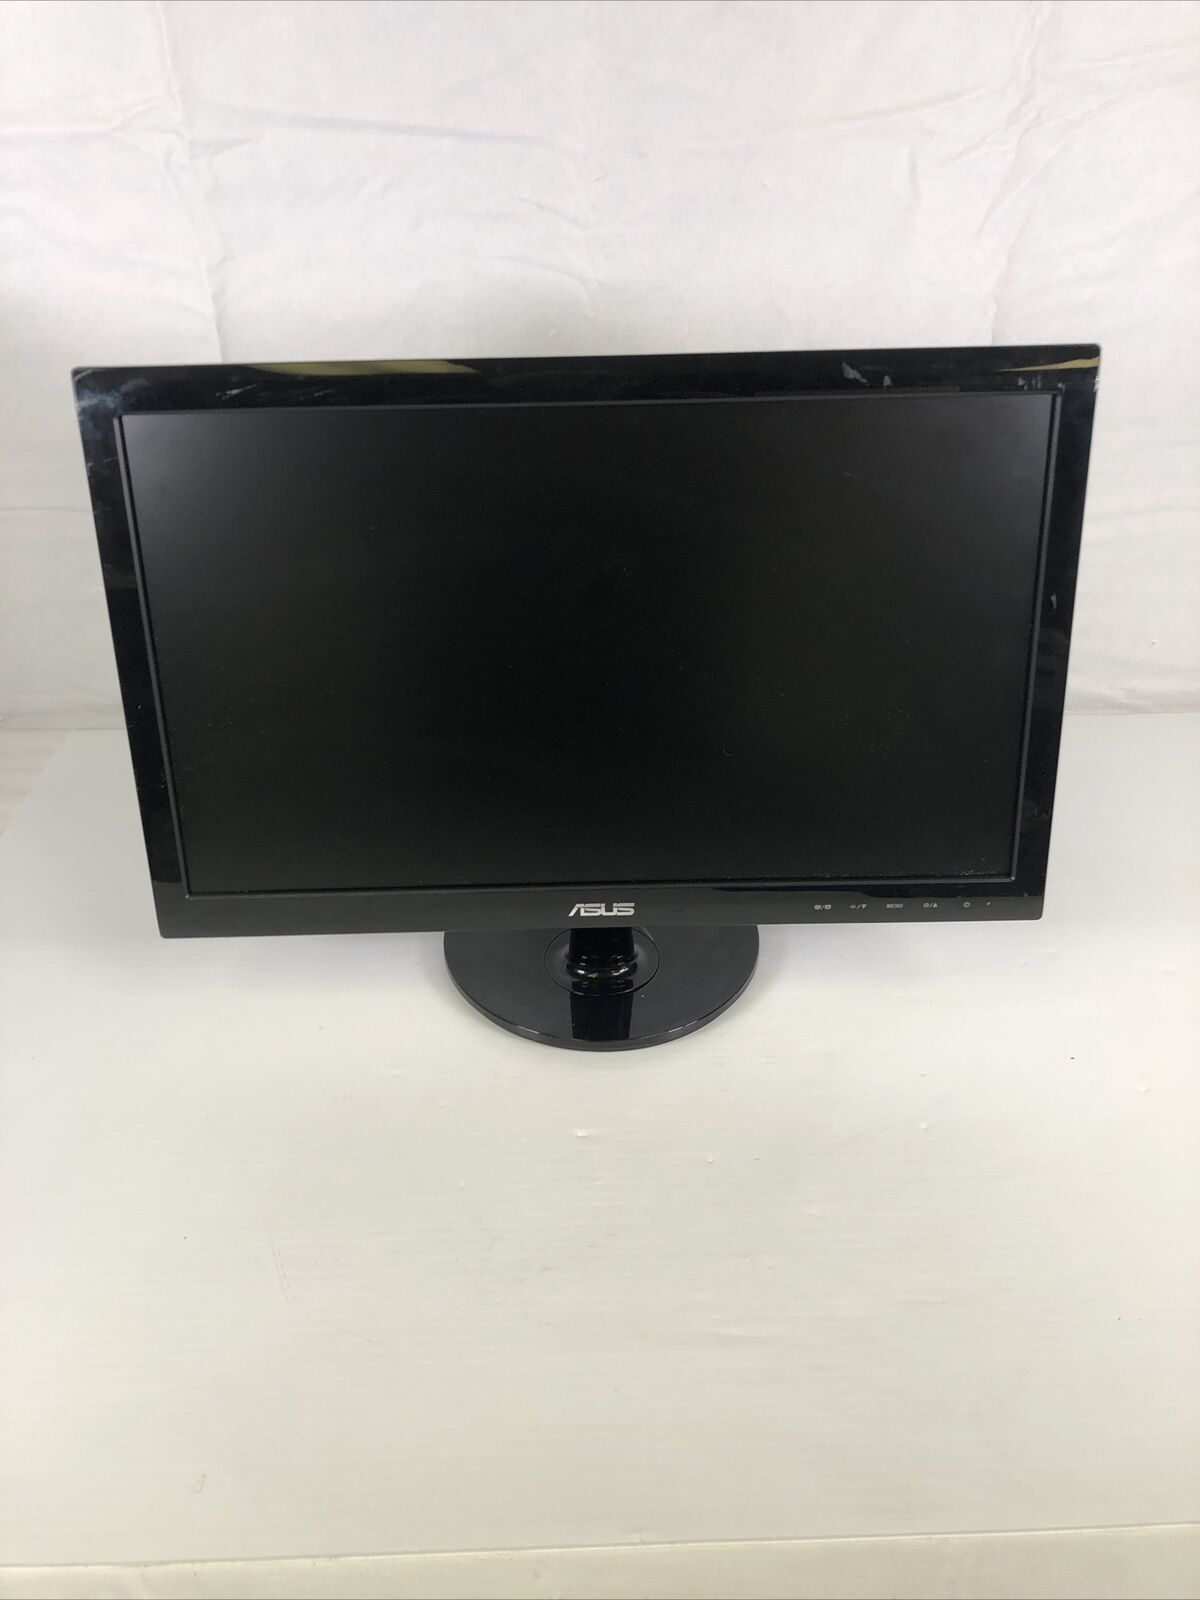 Asus VS197 18.5in Widescreen LCD Monitor 1366x768 5ms Response Time Tested